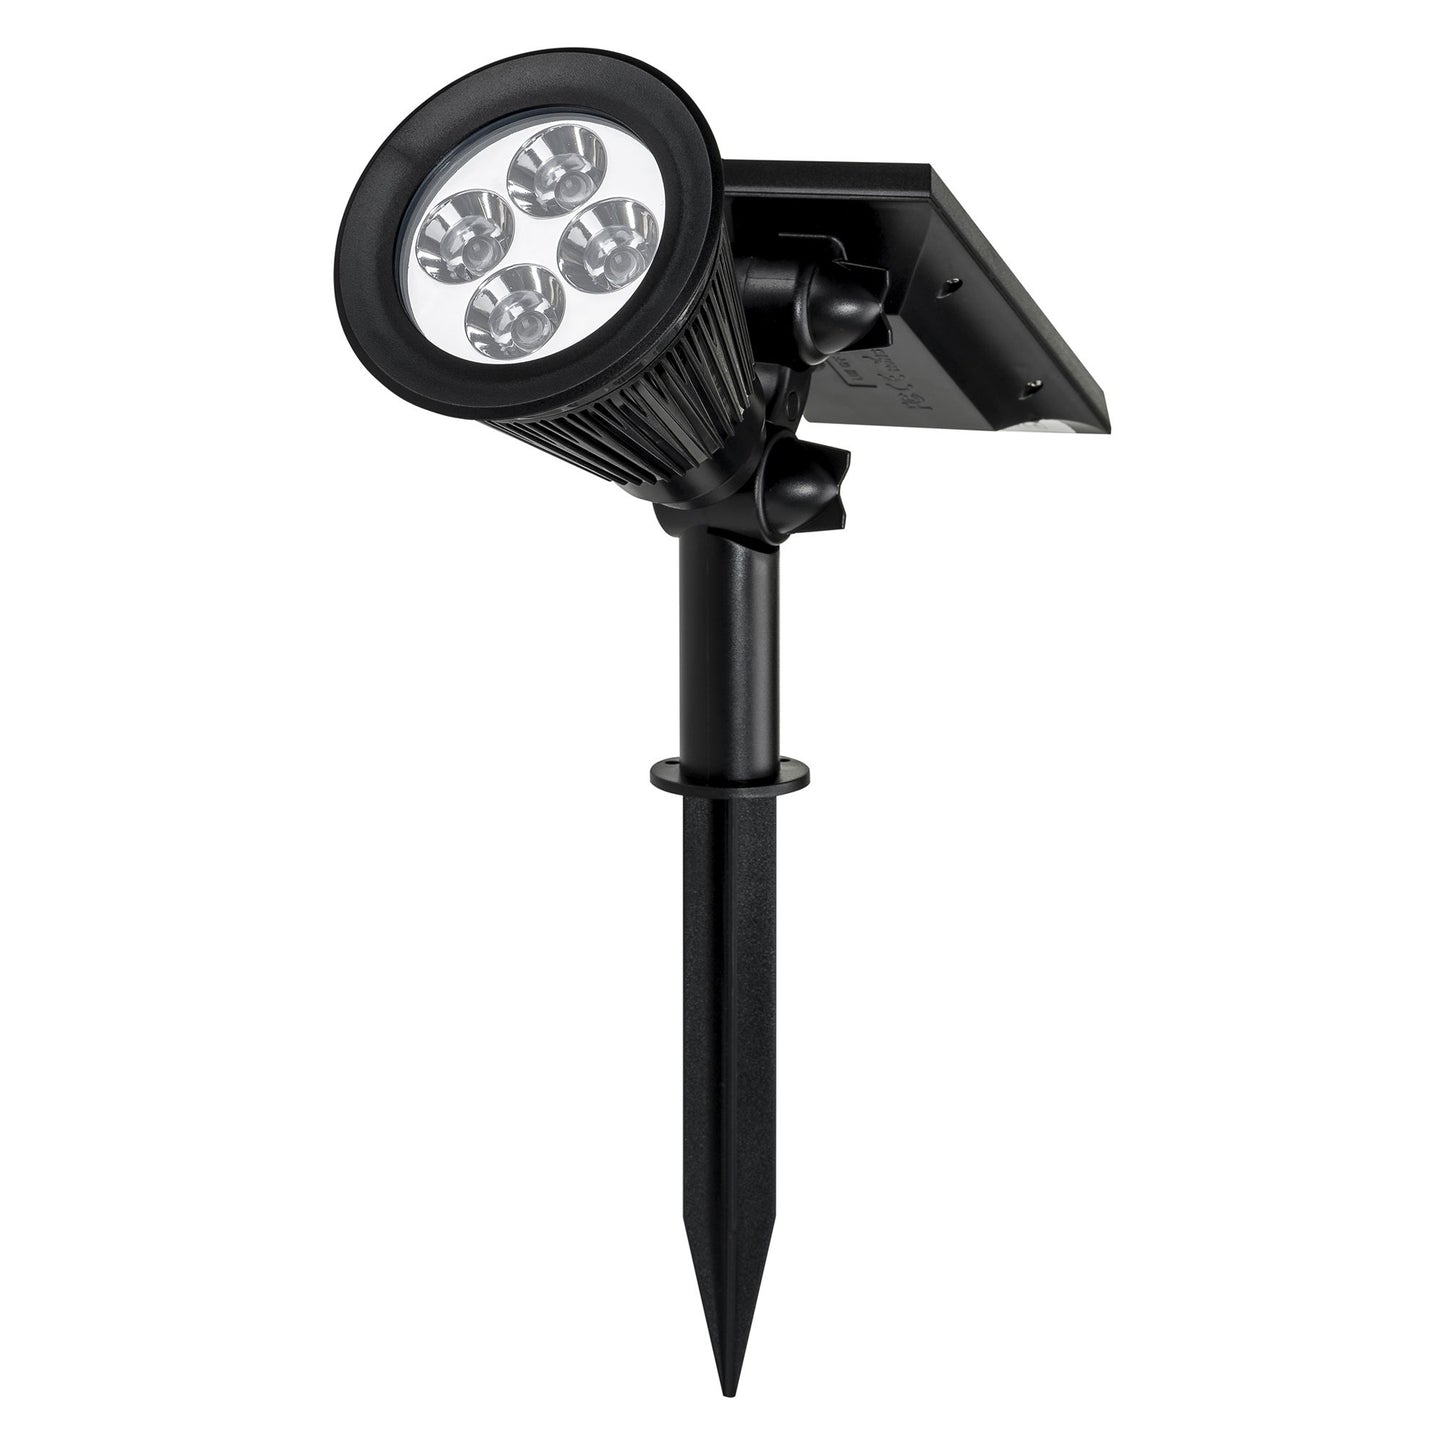 High-Output Garden Spot Light with Attached Solar Panel - Cool White